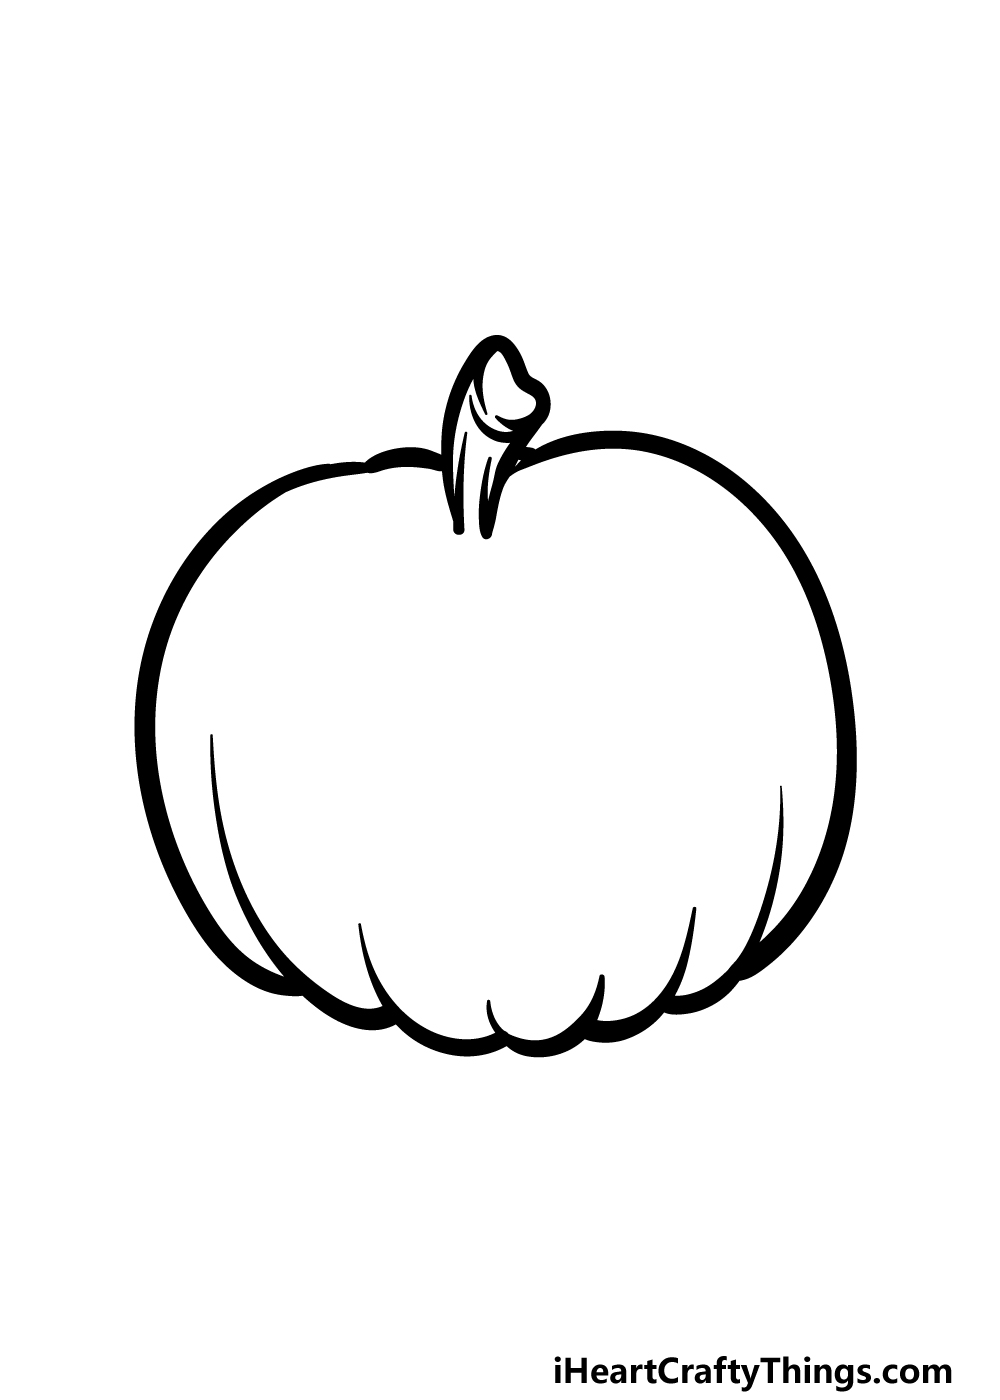 Scary Pumpkin Drawing - How To Draw A Scary Pumpkin Step By Step